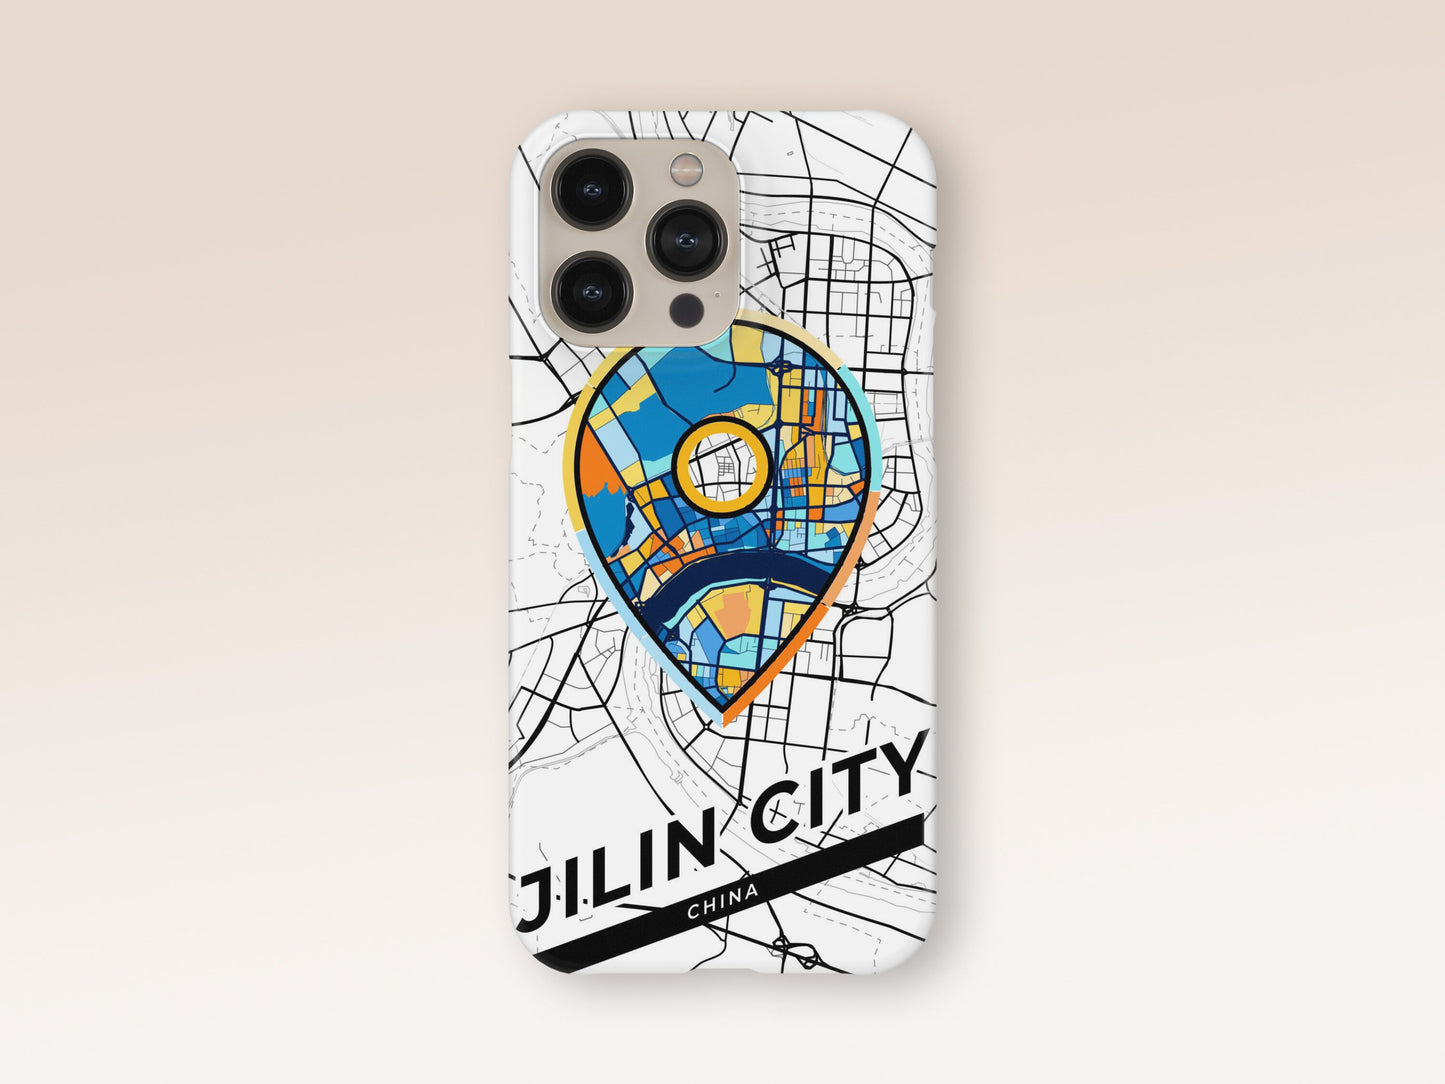 Jilin City China slim phone case with colorful icon. Birthday, wedding or housewarming gift. Couple match cases. 1